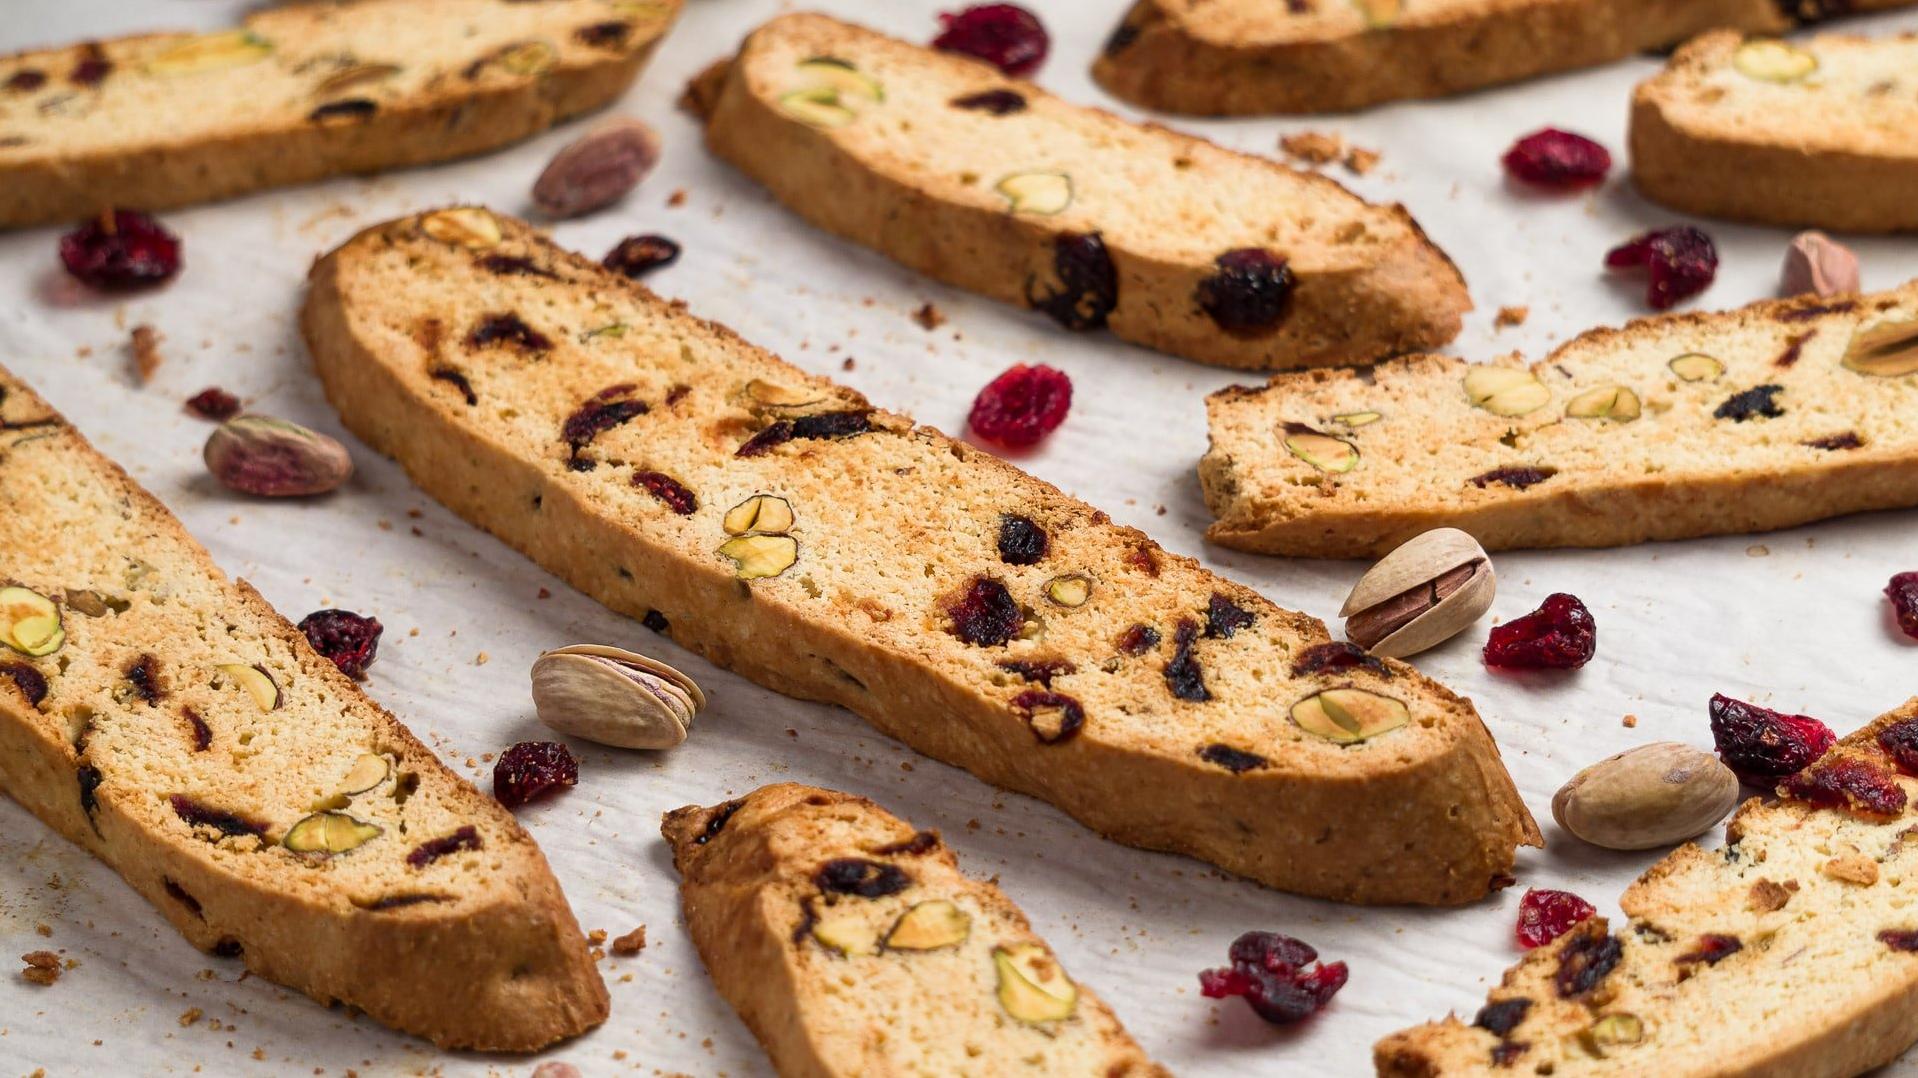  A foolproof recipe for a classic crunchy and nutty biscotti.